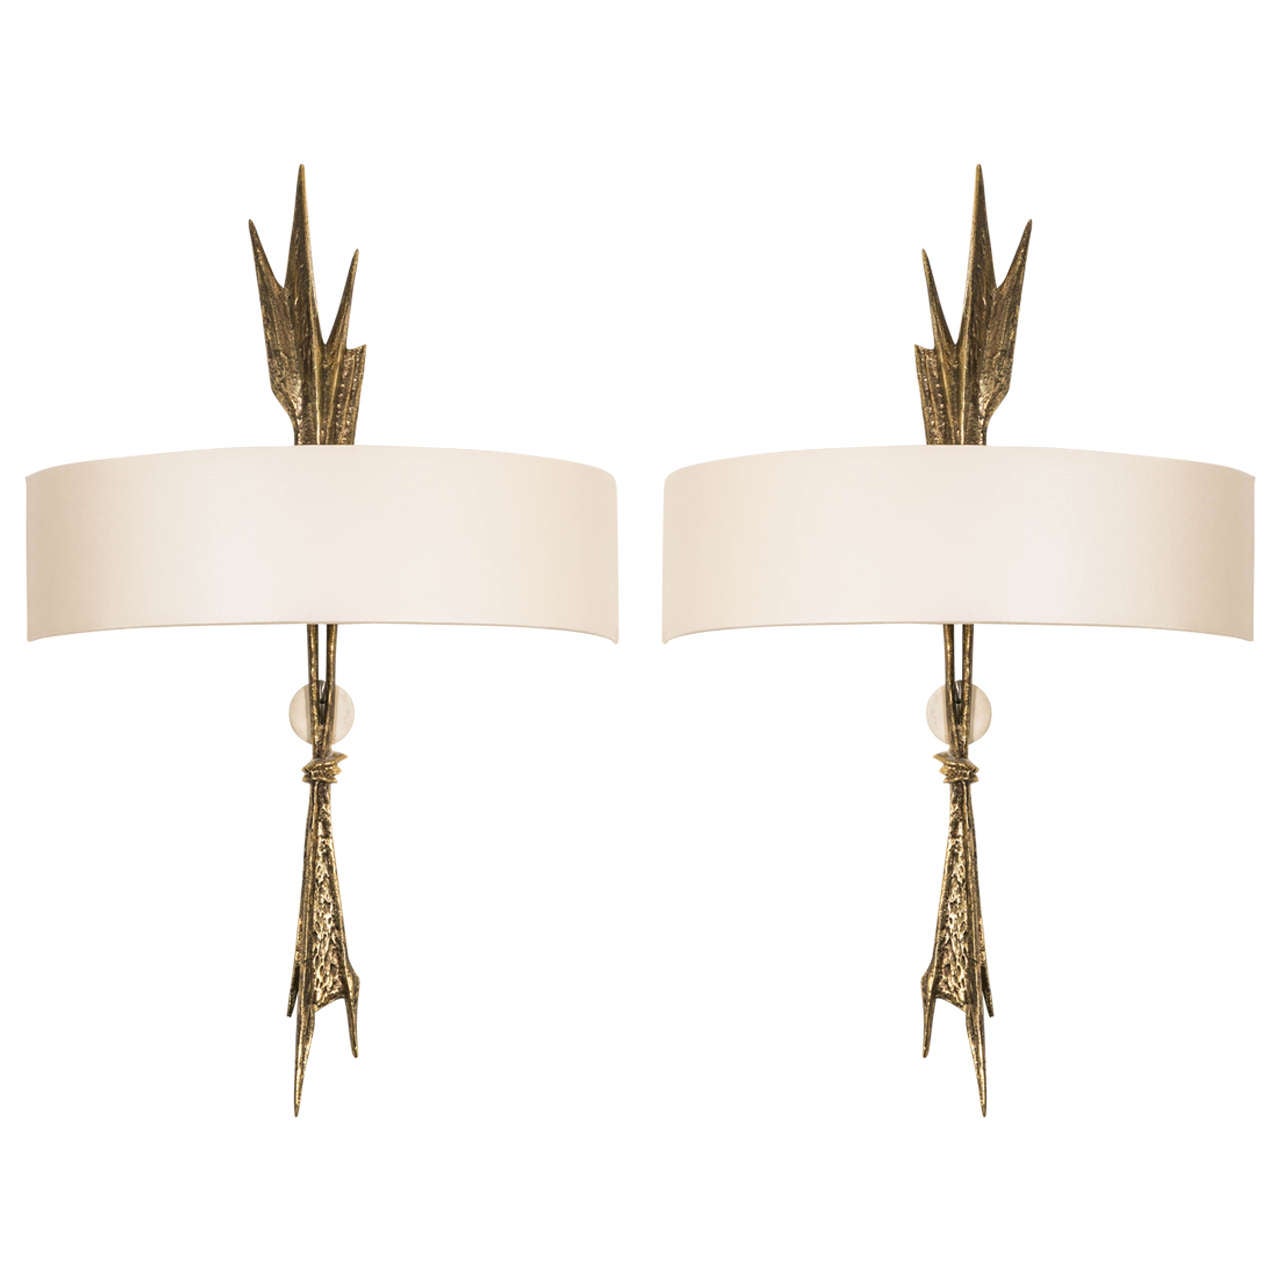 Pair of Gilt Bronze Wall Lights Called "Love" by Félix Agostini